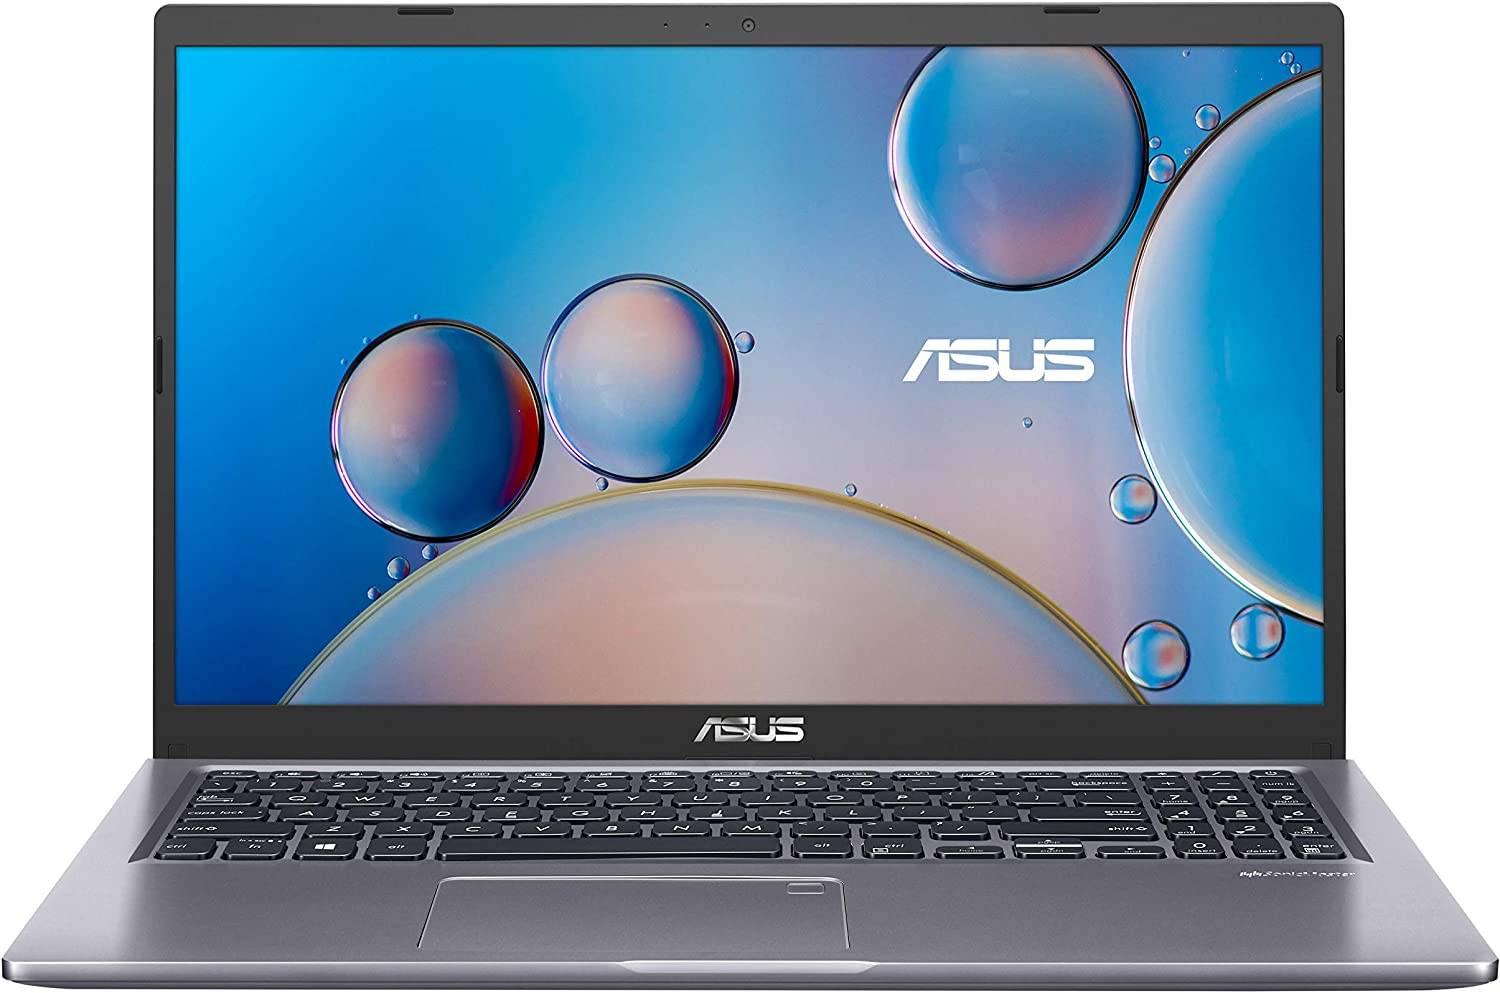 ASUS VivoBook 15 F515 Thin and Light Laptop, 15.6” FHD Display